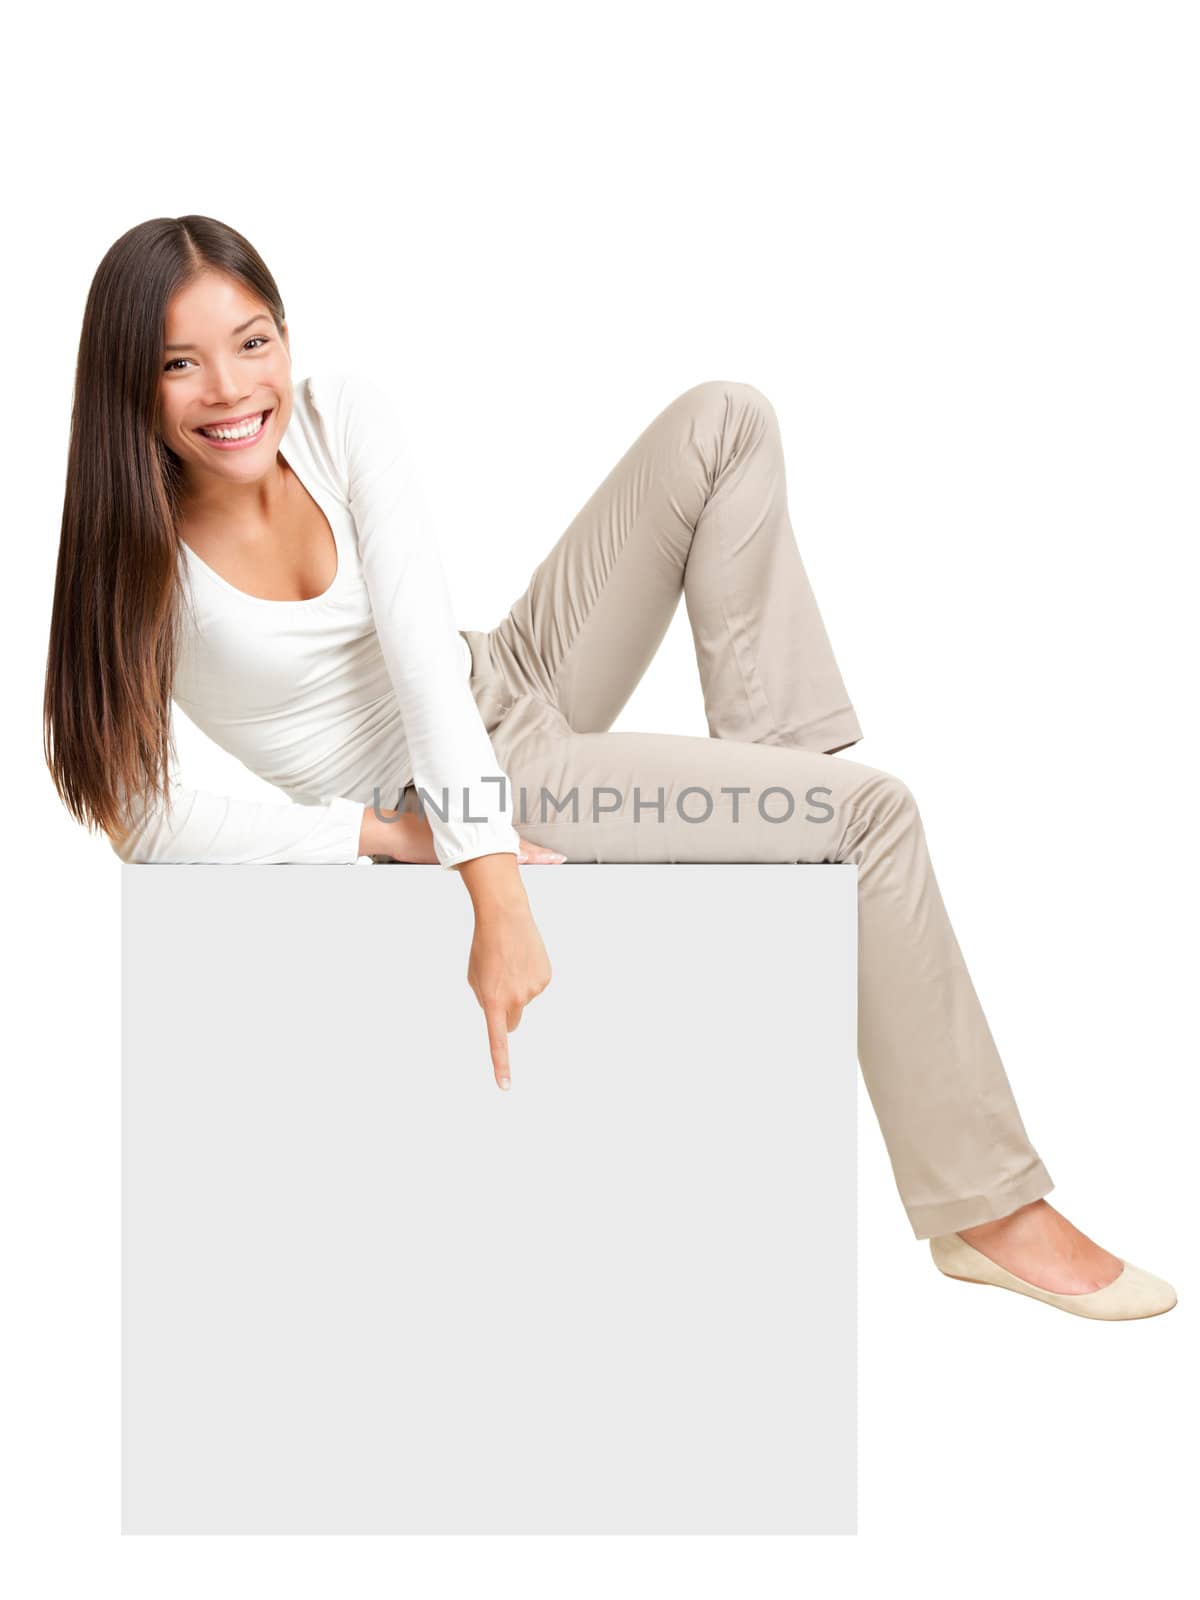 Woman sitting on / showing sign by Maridav